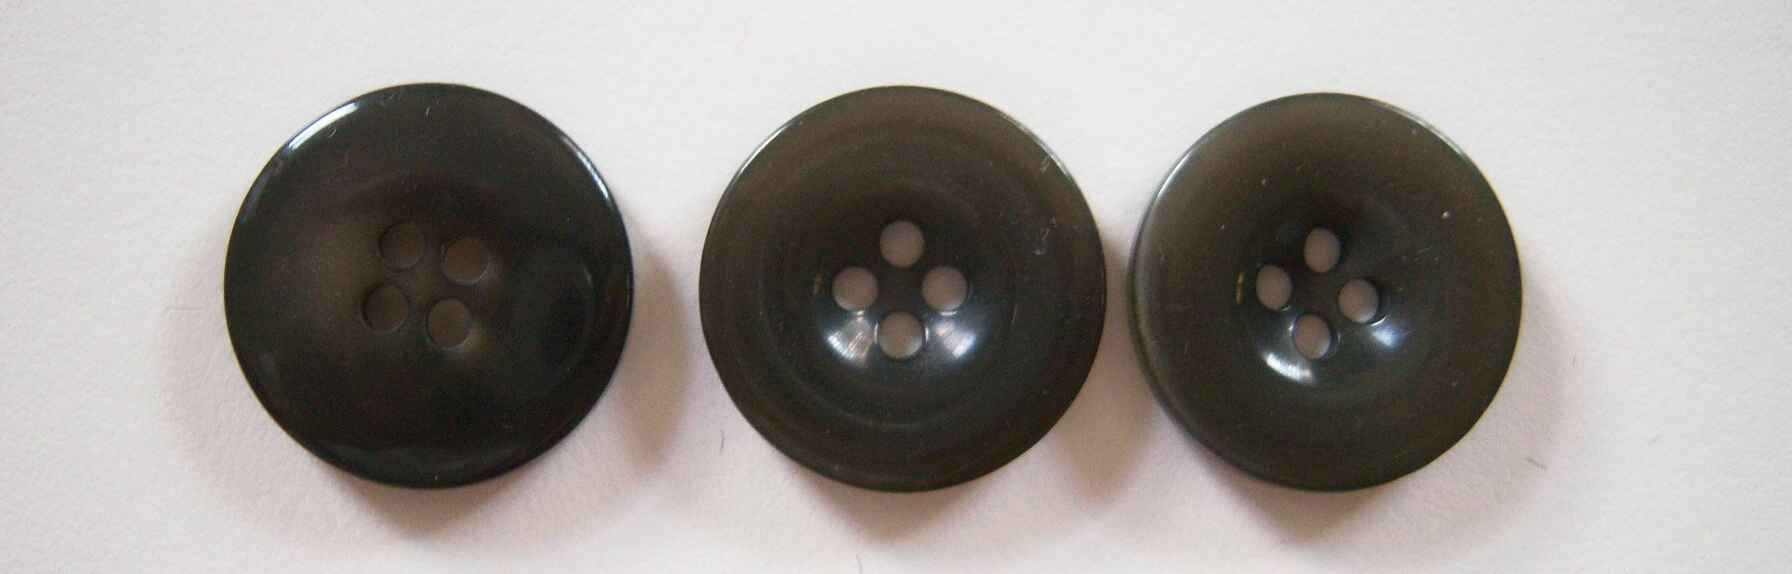 Grey/Charcoal 3/4" 4 Hole Button